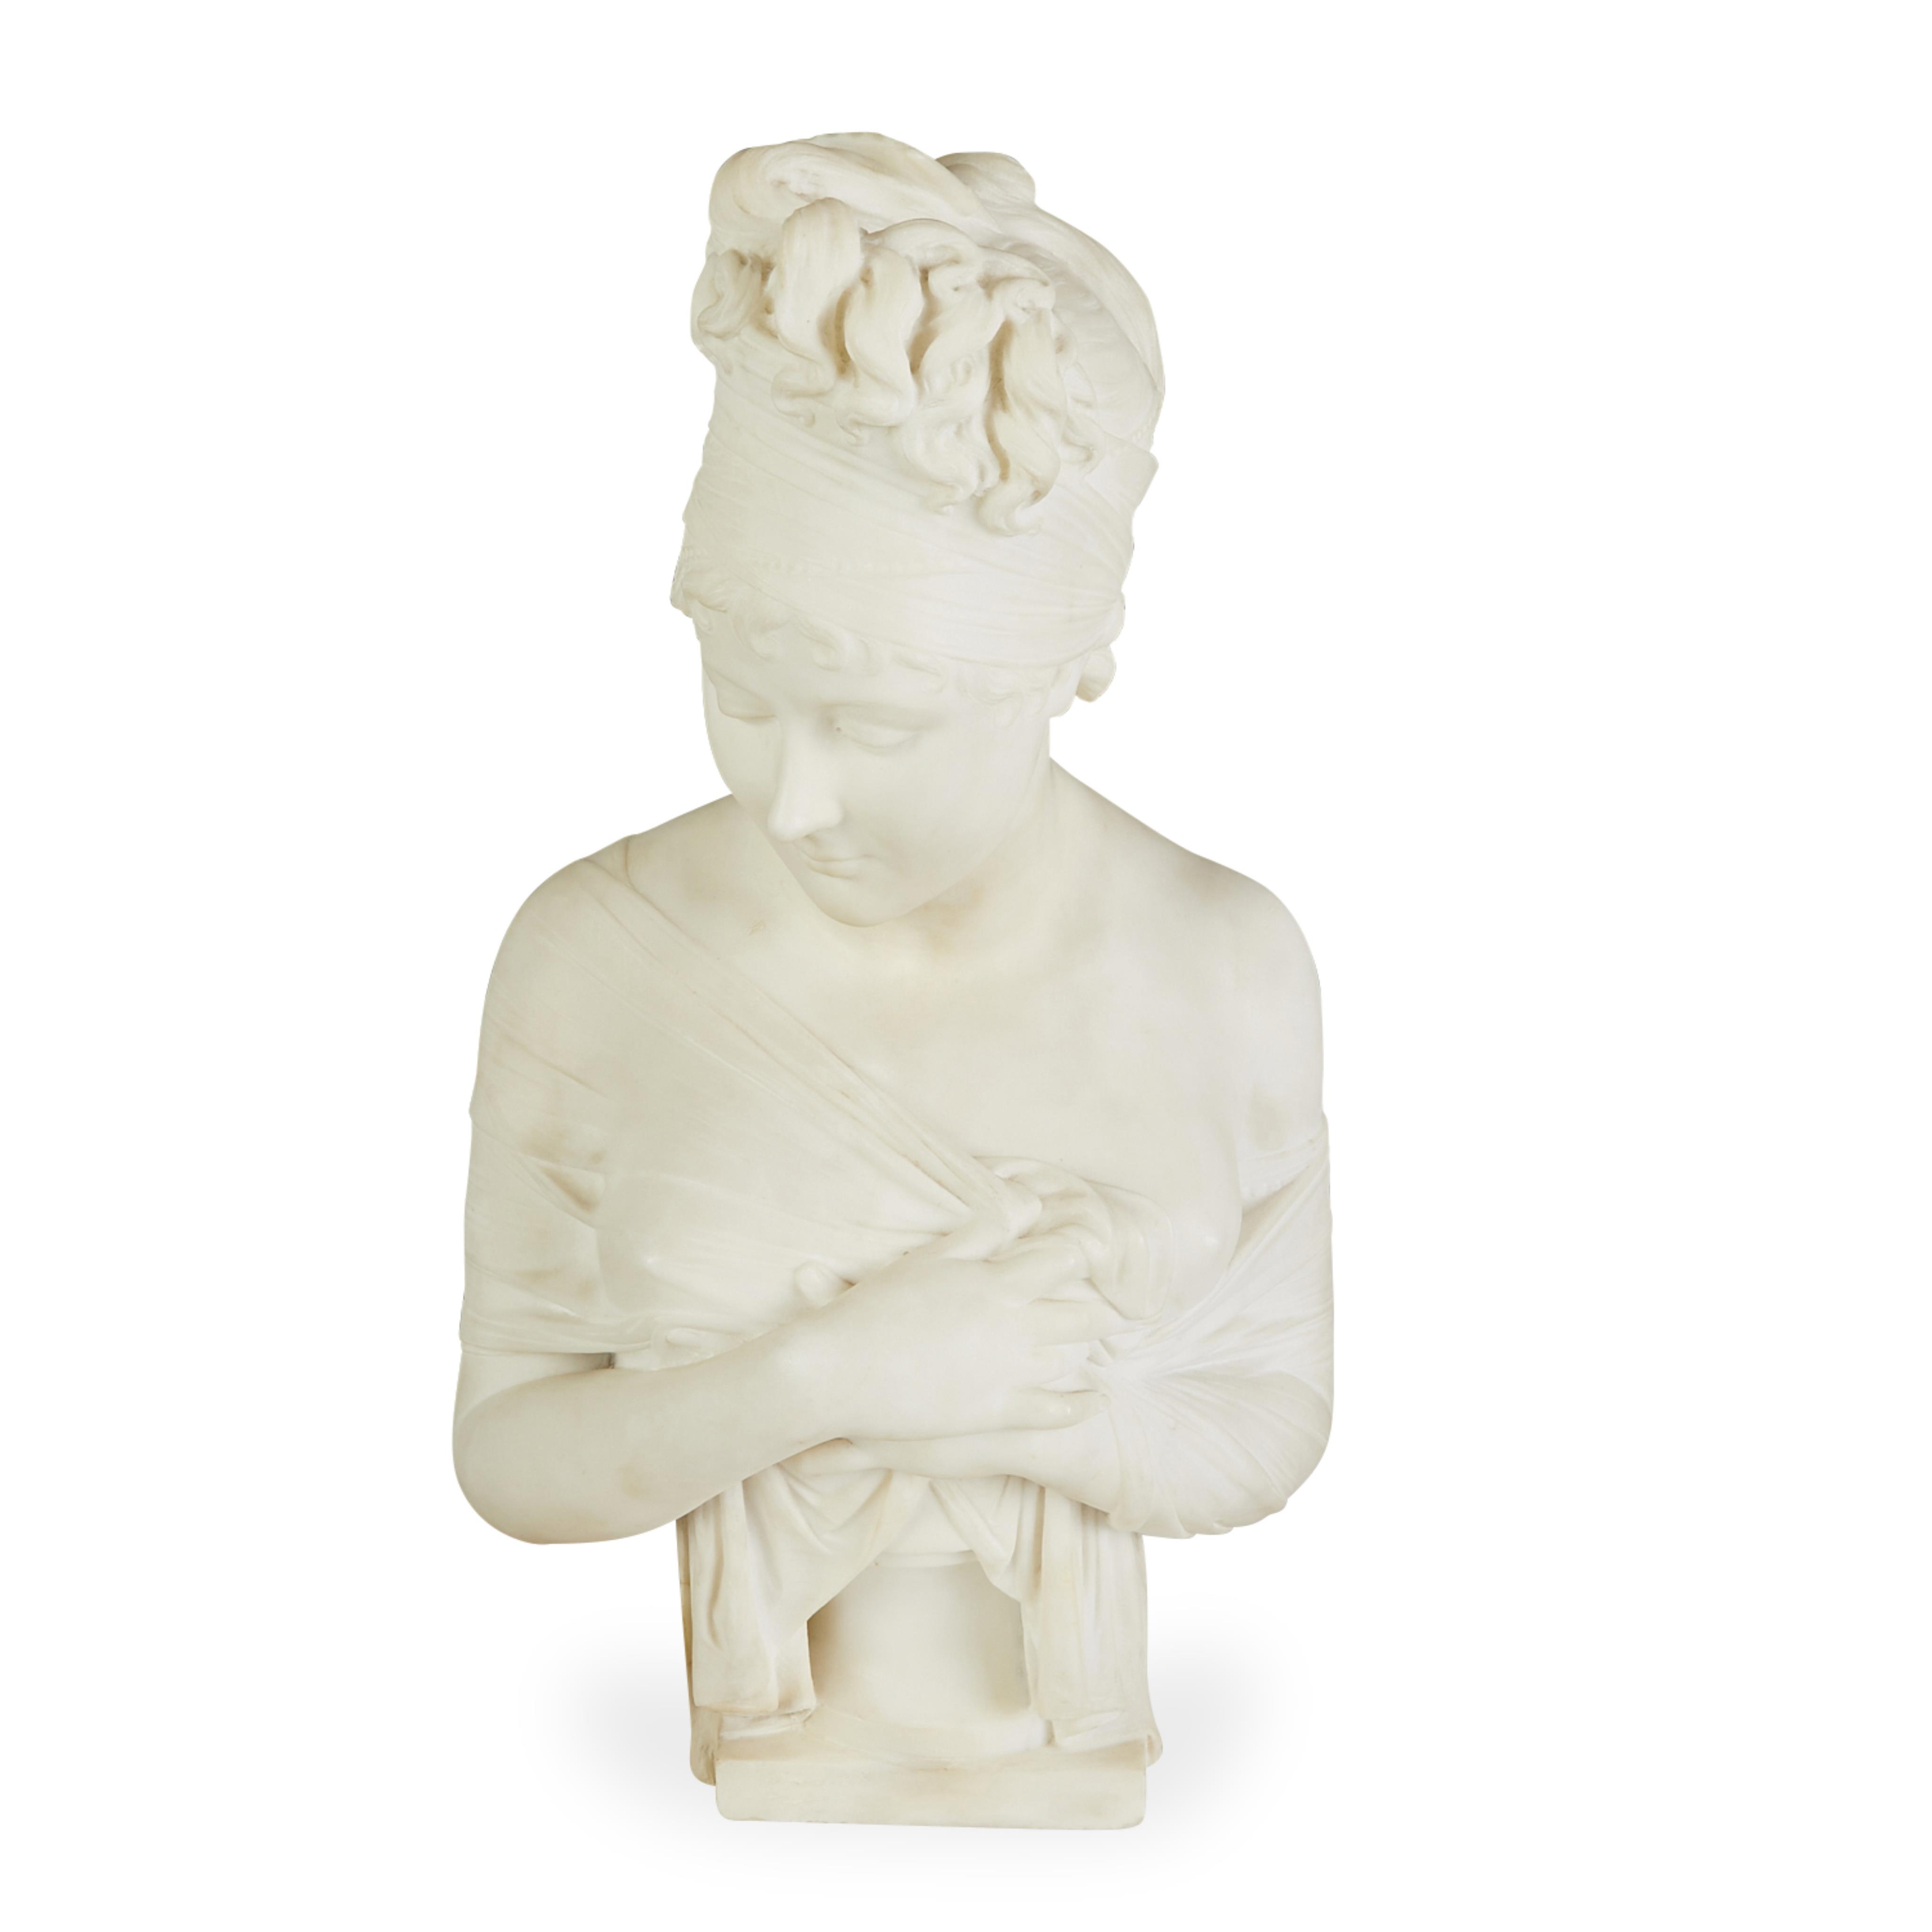 After Joseph Chinard "Madame Recamier" Marble Bust - Image 9 of 9